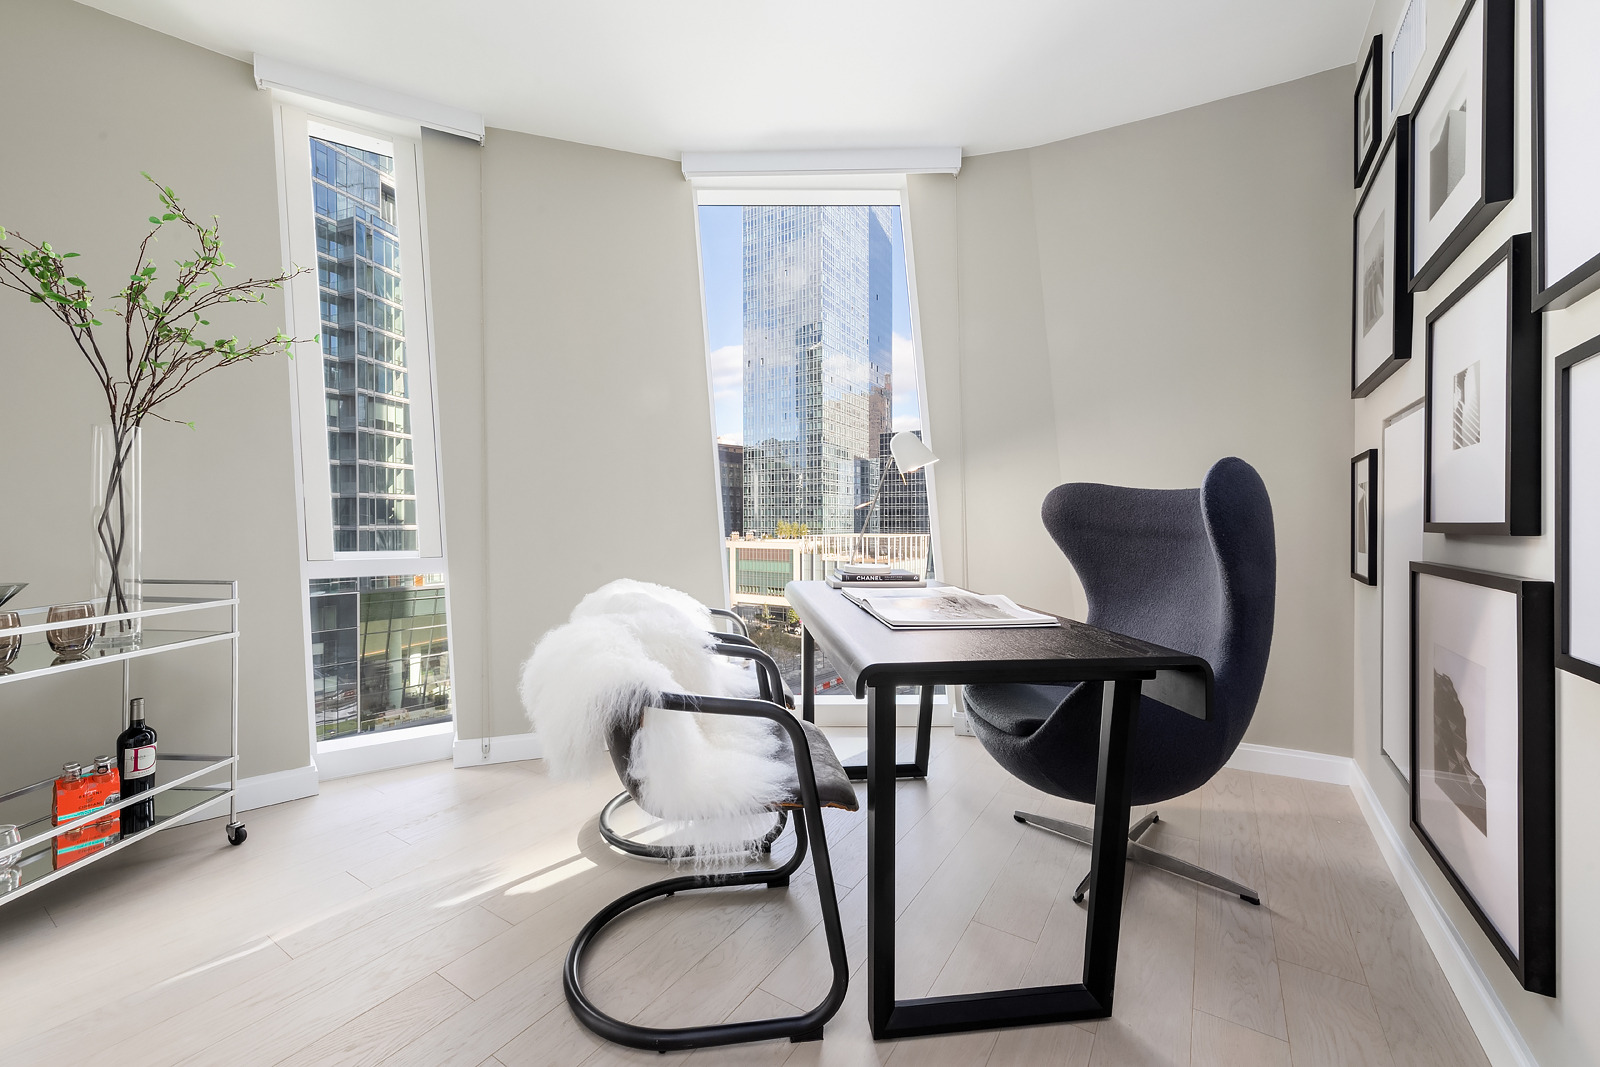 Modern home office with sleek furniture and floor-to-ceiling windows offering an urban view.